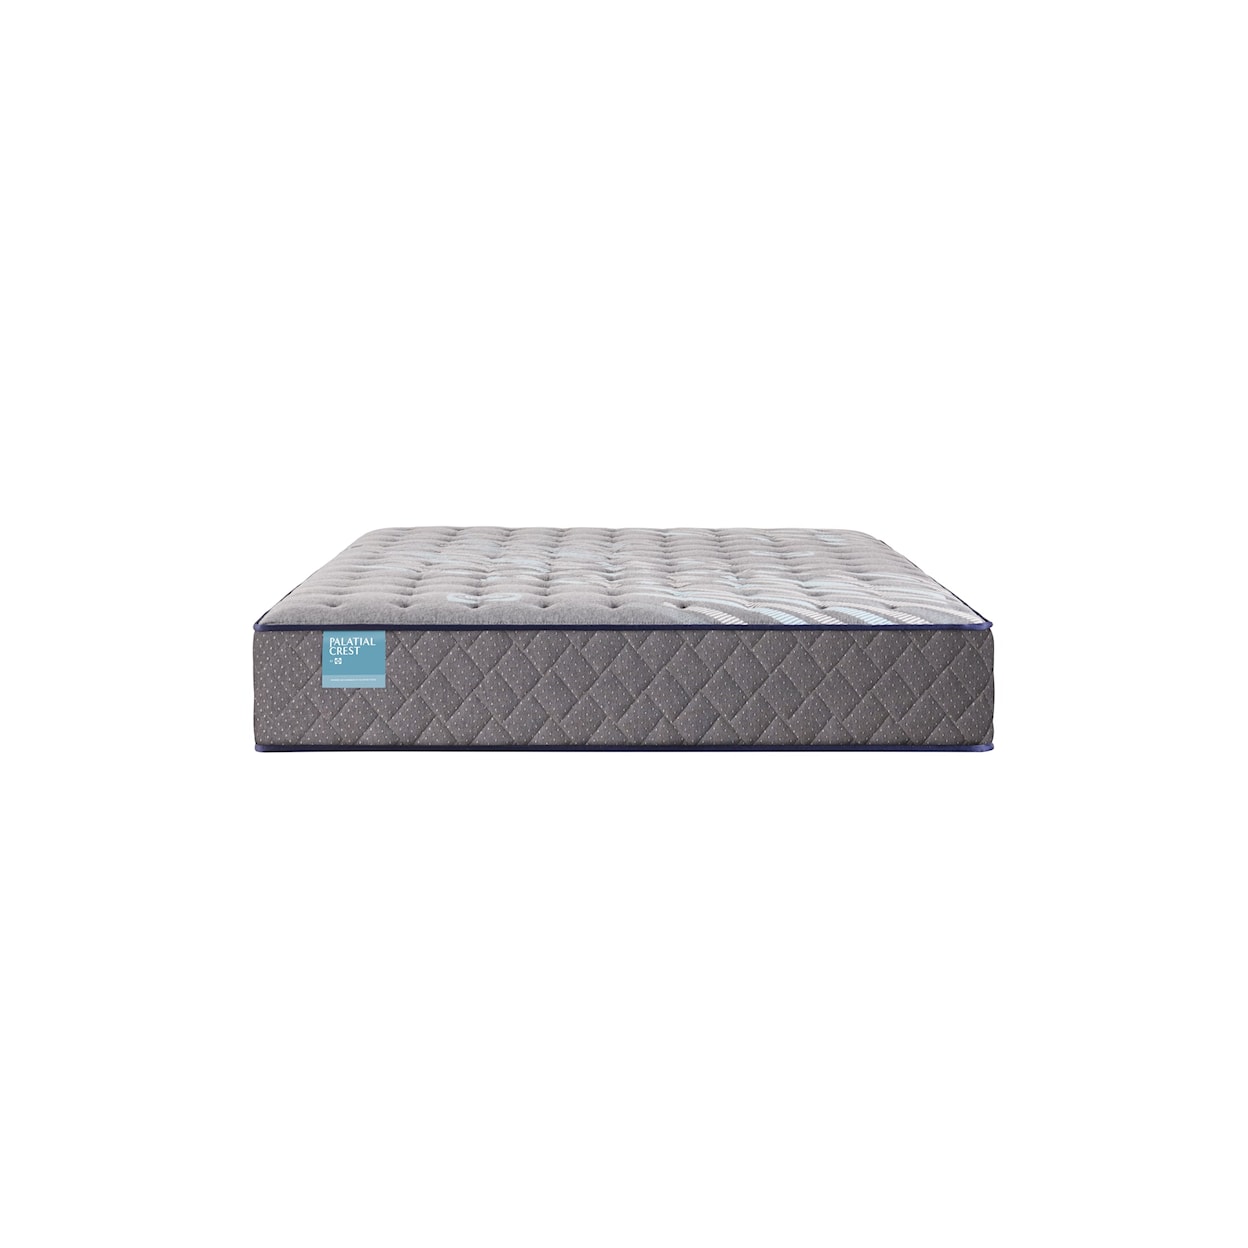 Sealy Palatial Crest S6 Cathedral Cove Firm TT Twin Mattress